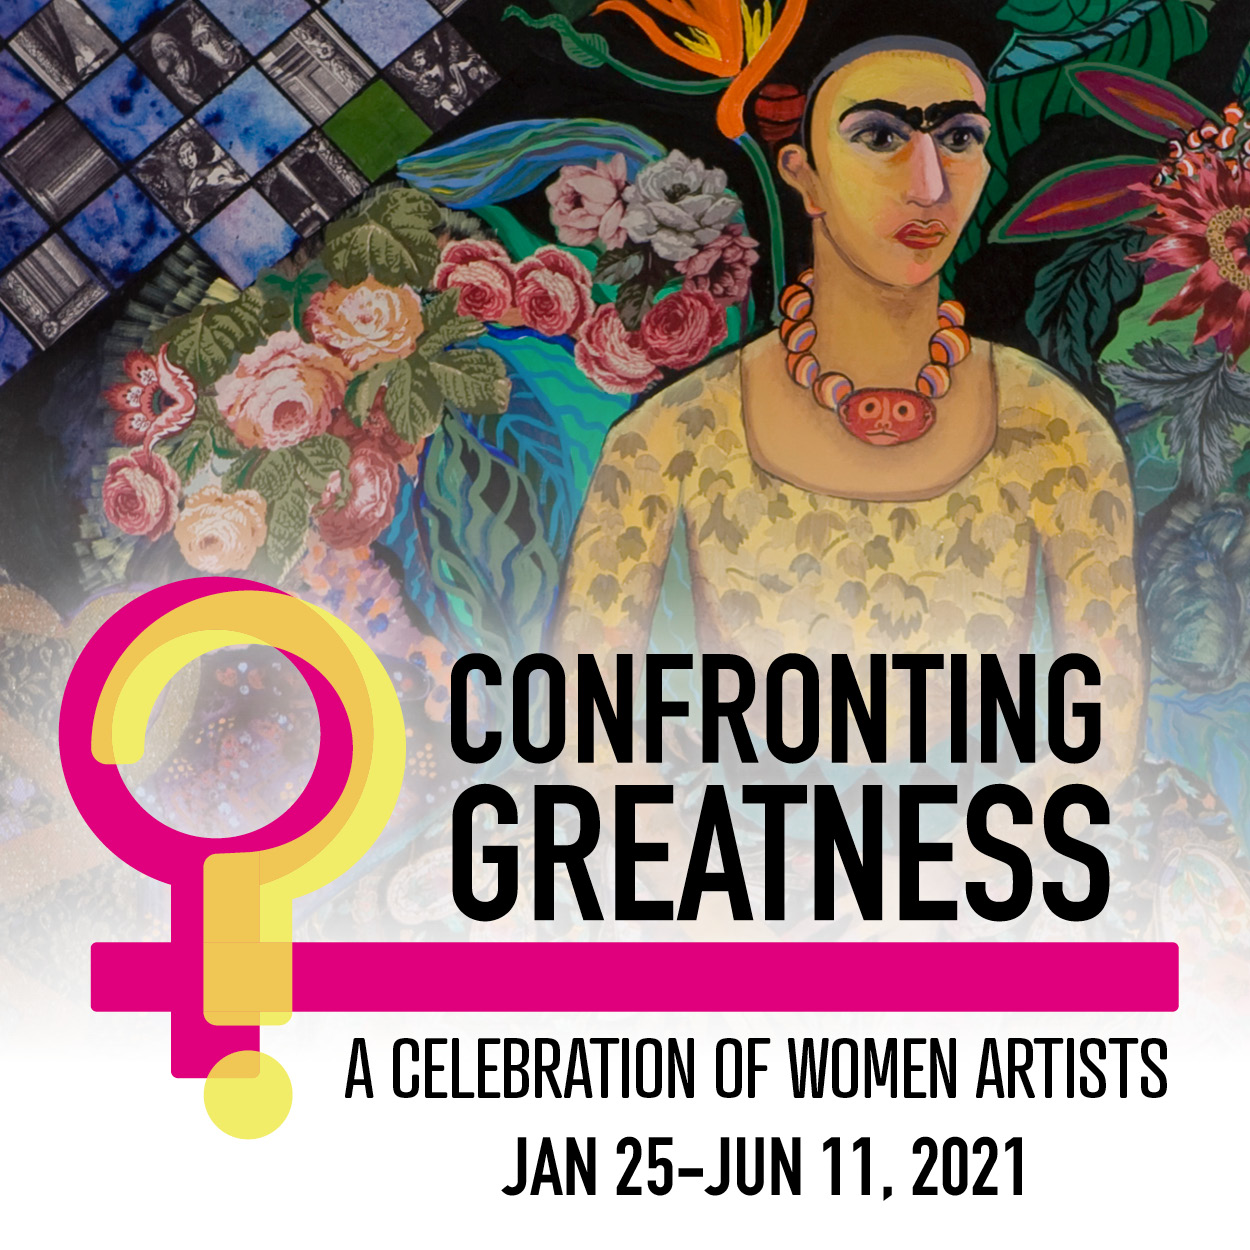 Confronting Greatness A Celebration of Women Artists January 25-June 11, 2021